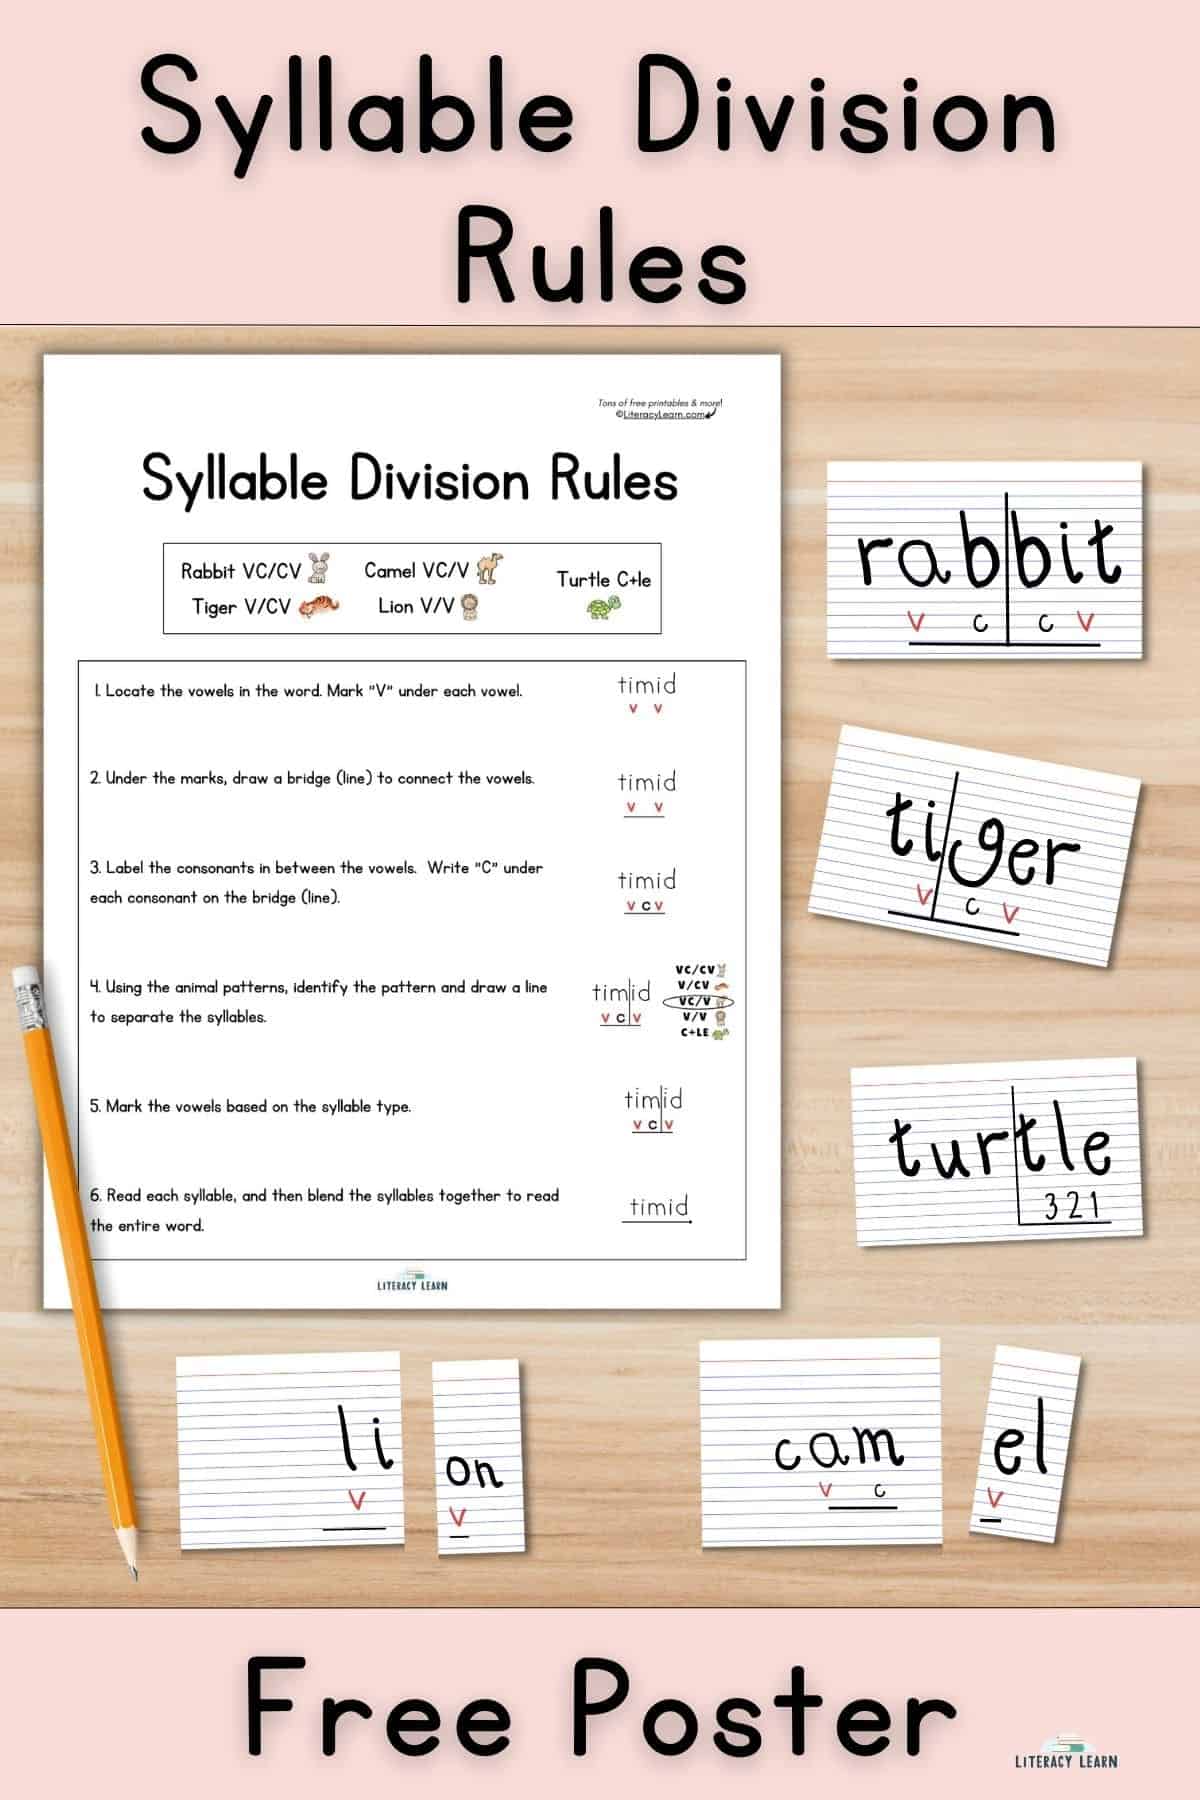 Syllable division poster with syllable type words on index cards shown divided into syllables. 